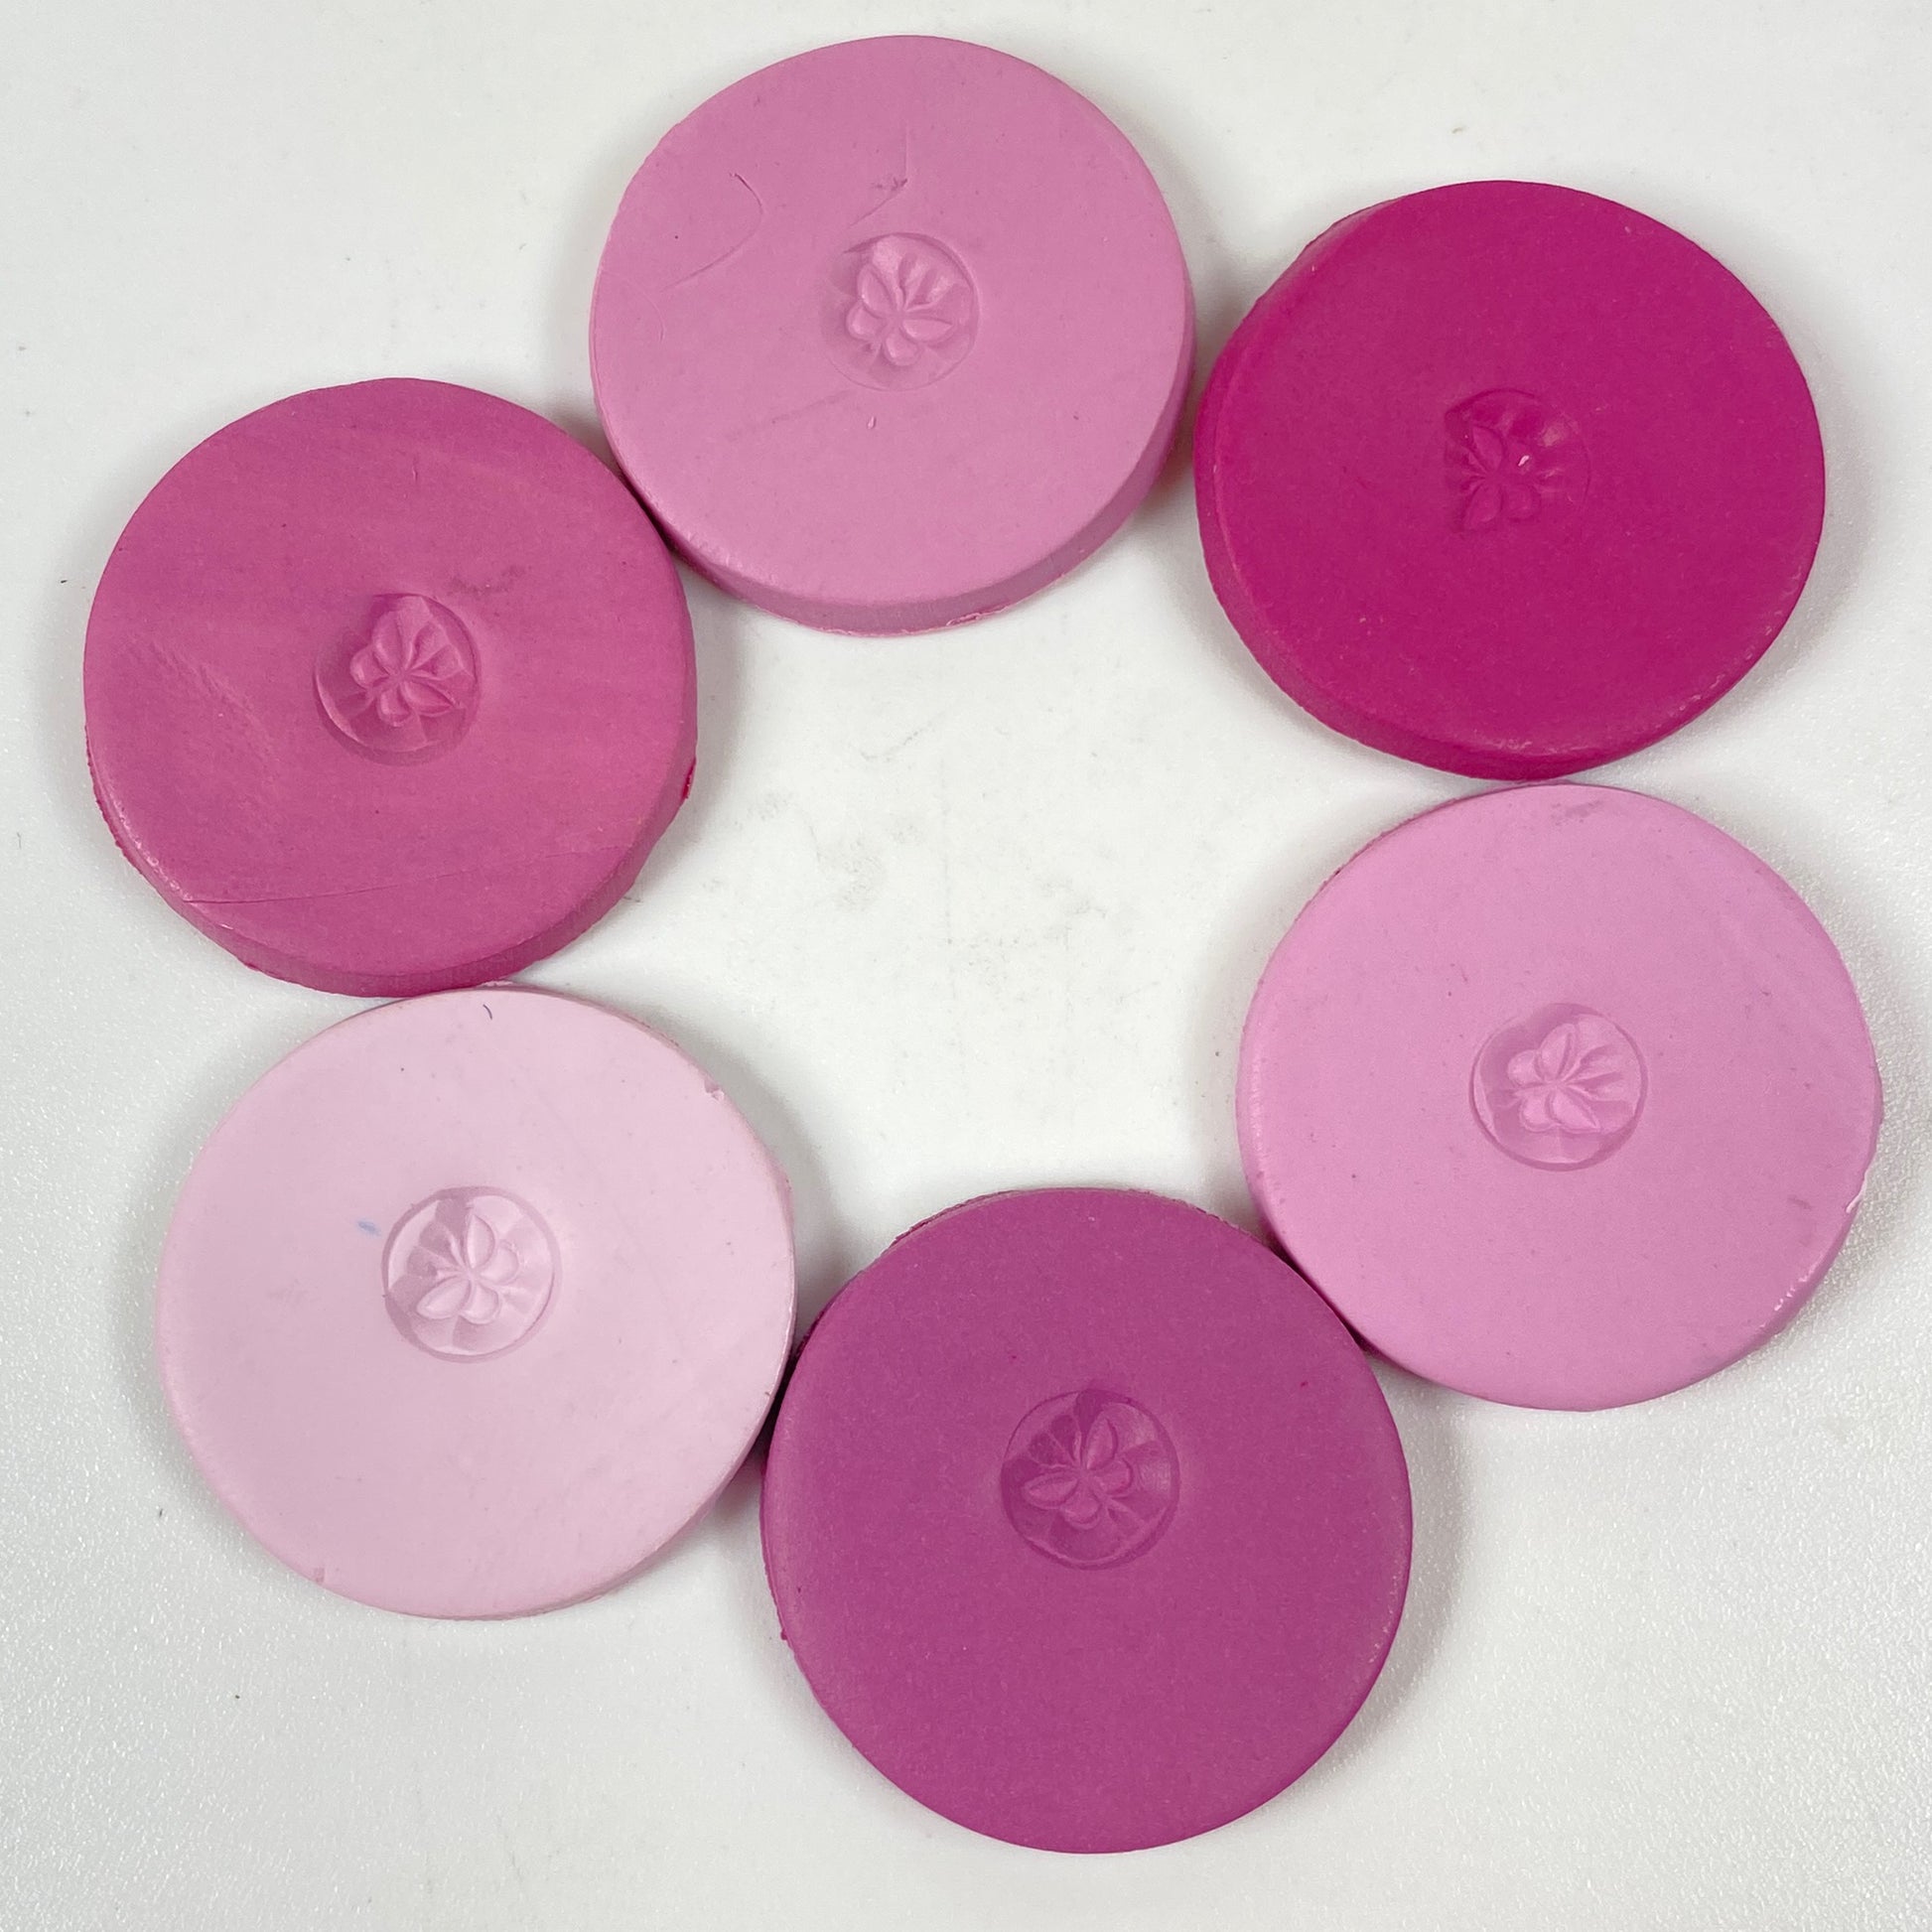 Discs of Polymer Clay in all 6 pink and purple colors of this palette, arranged in a ring.